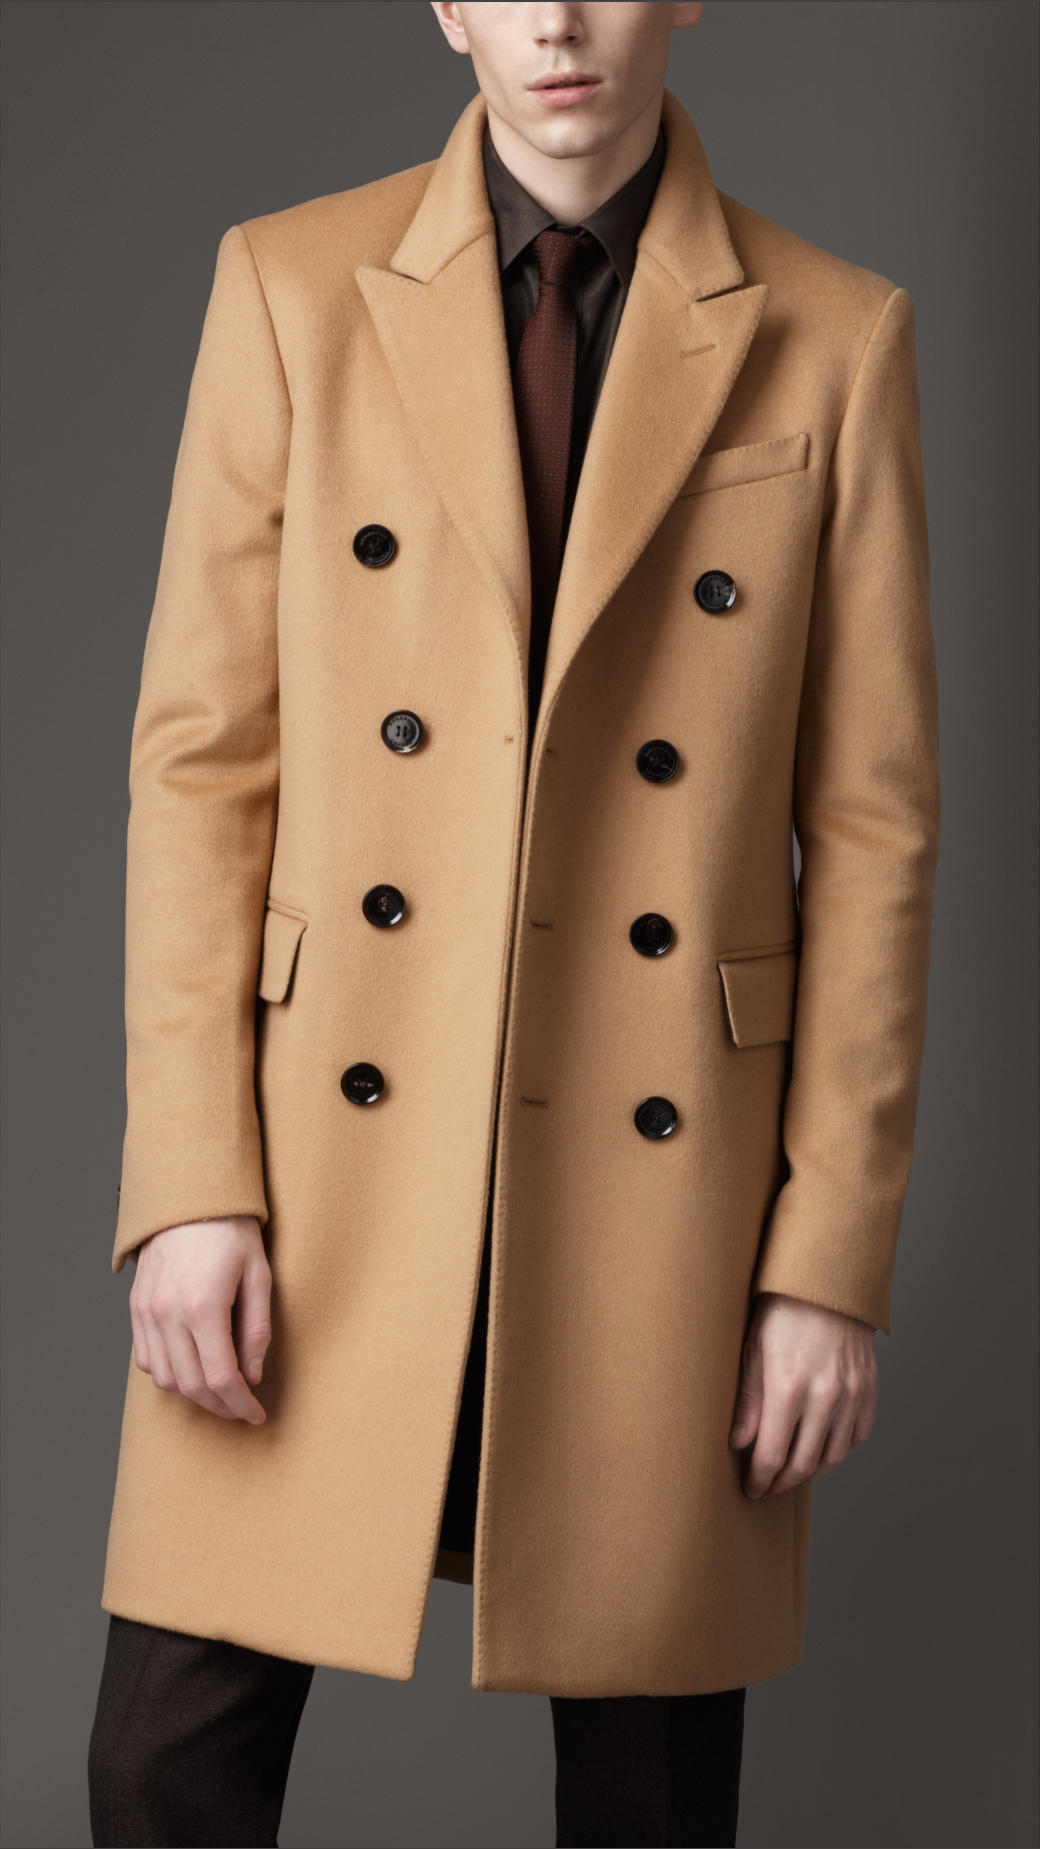 Lyst - Burberry Felted Wool Topcoat in Natural for Men